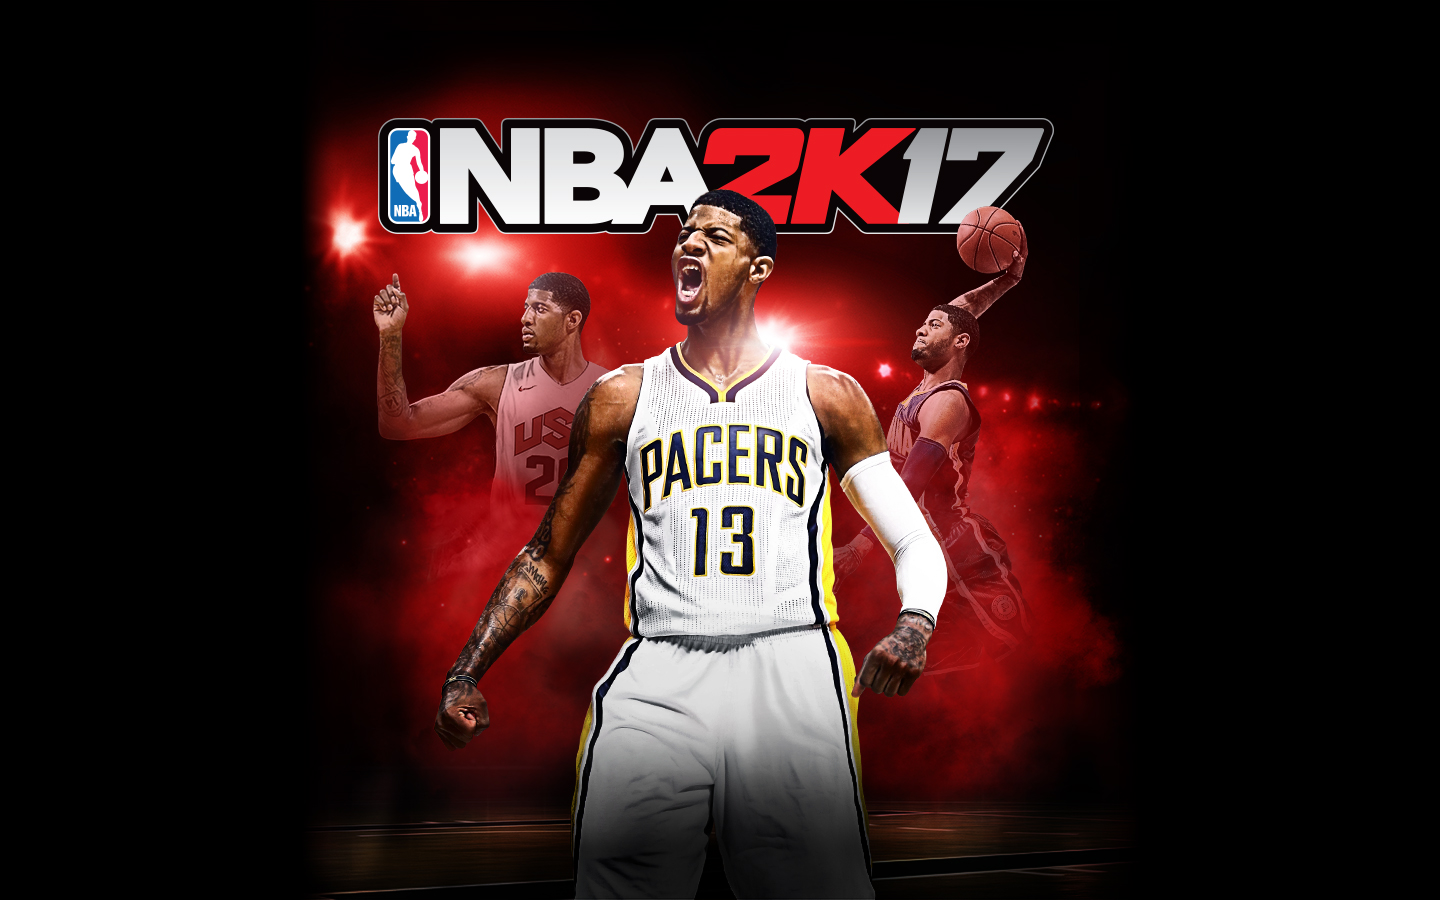 Free download NBA 2K17 Game PS3 PlayStation [1600x900] for your Desktop, Mobile & Tablet. Explore NBA 2K18 HD Wallpaper. NBA 2K18 HD Wallpaper, NBA 2K18 Wallpaper, 2K18 Wallpaper